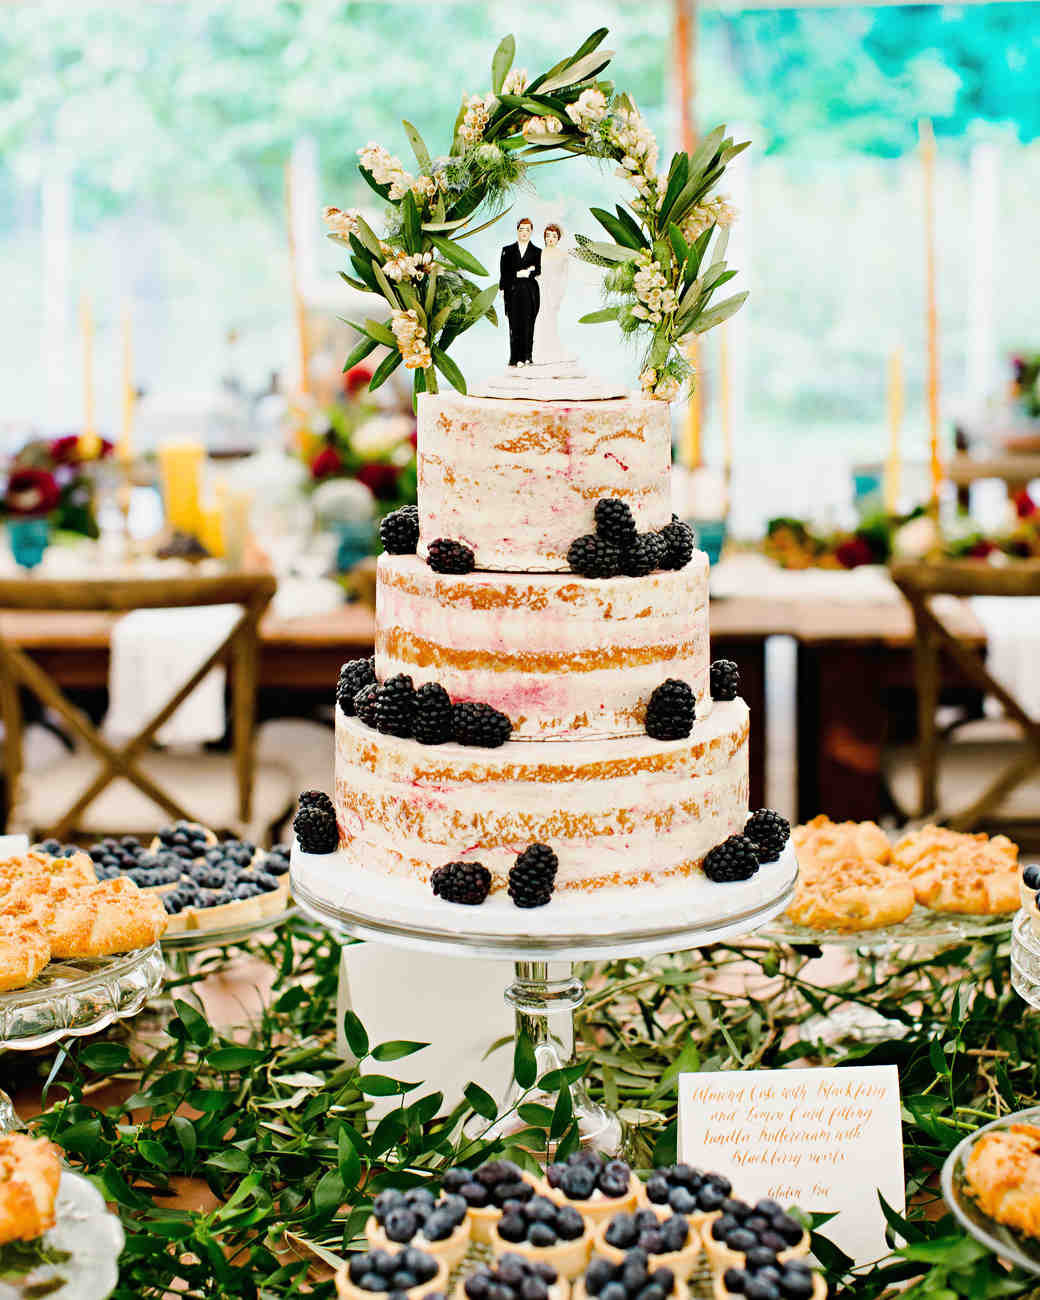 Cake Table Wedding
 42 Fruit Wedding Cakes That Are Full of Color and Flavor